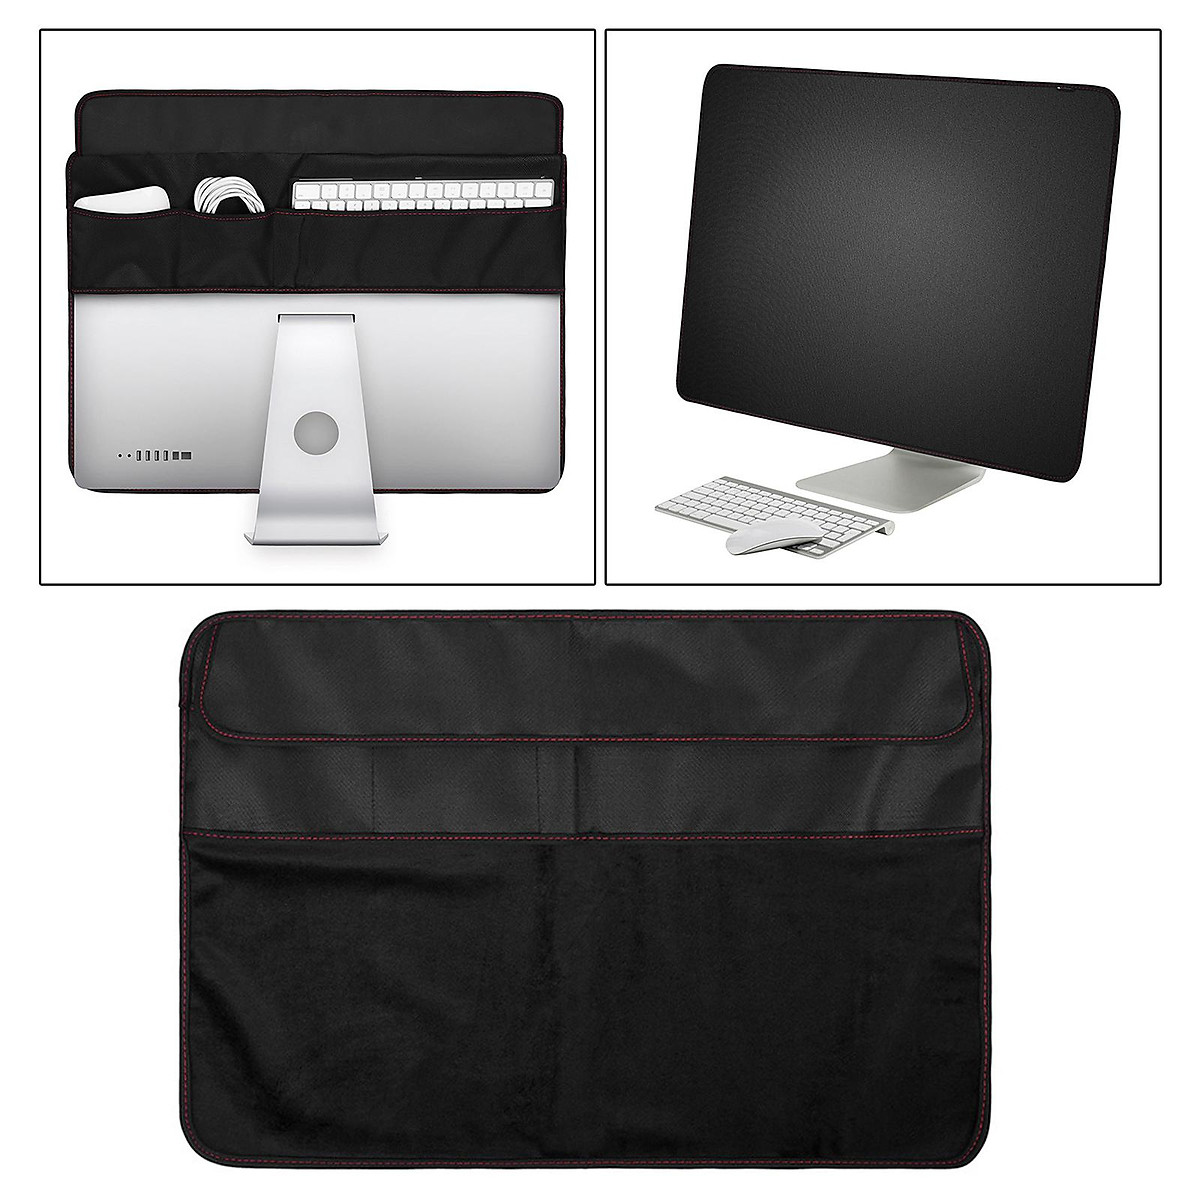 Travel Carrying Case For 24 Imac Desktop Computer, Protective Storage Bag  For Imac Monitor Dust Cover With Carry Handle For 24 Inch Imac Screen And  Ac | Fruugo NO